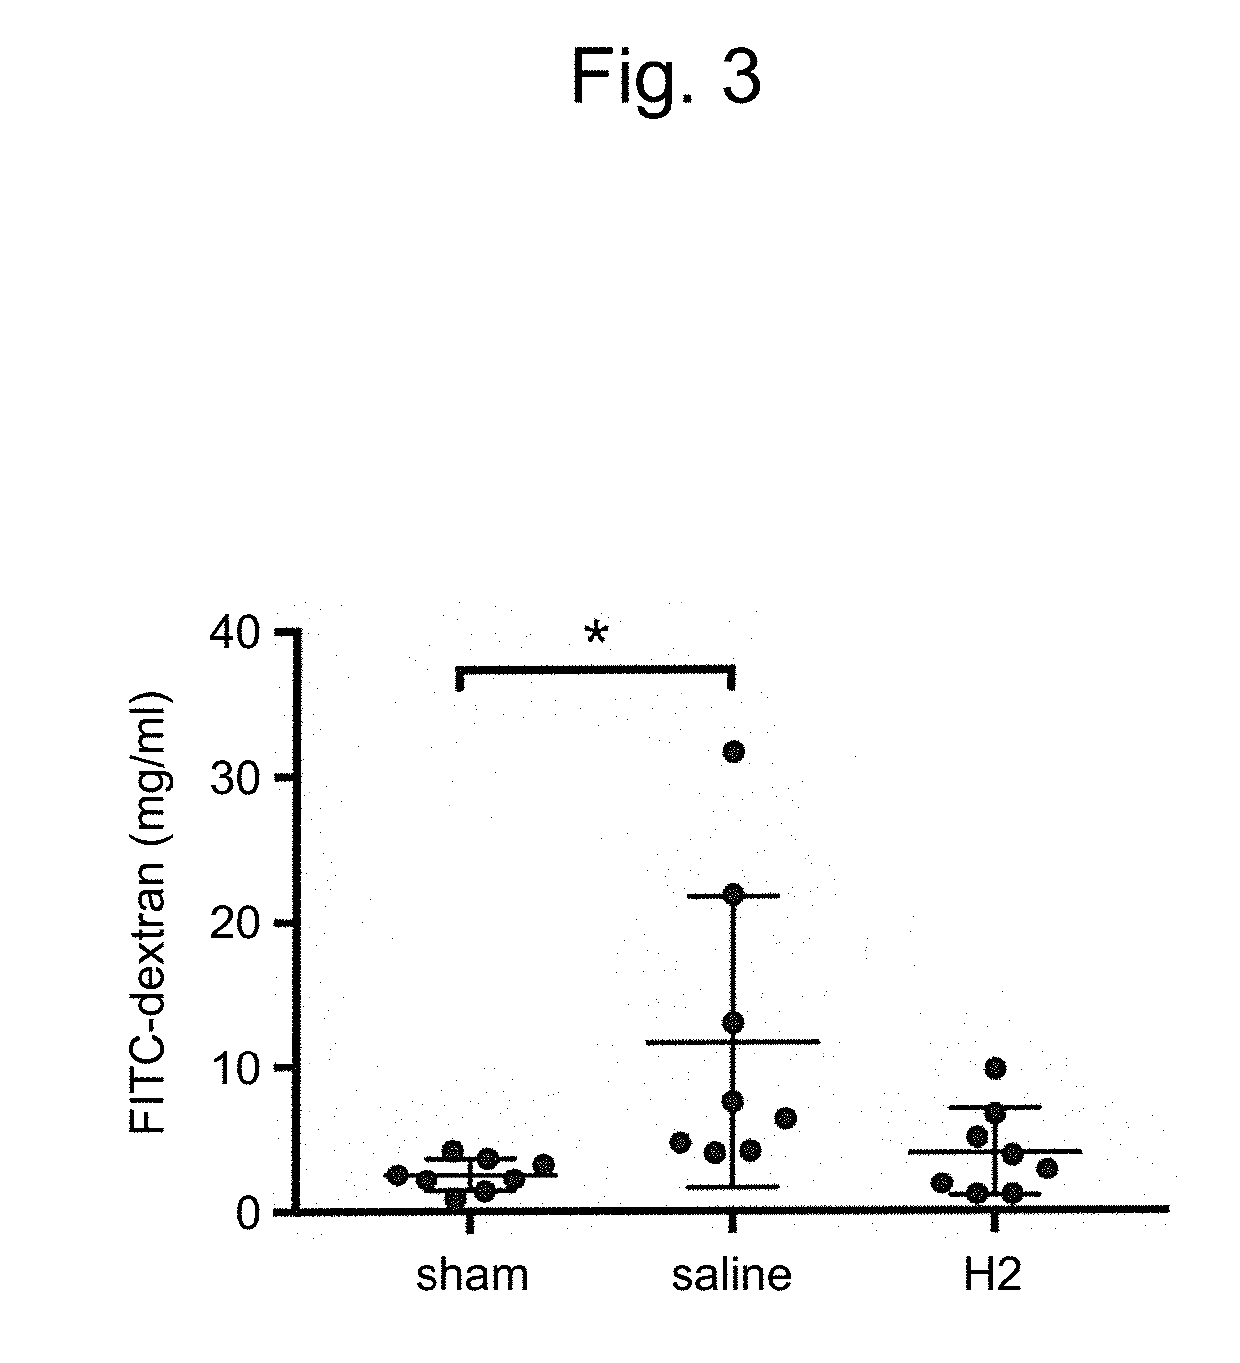 Composition for suppressing or preventing abnormality in intestinal environment